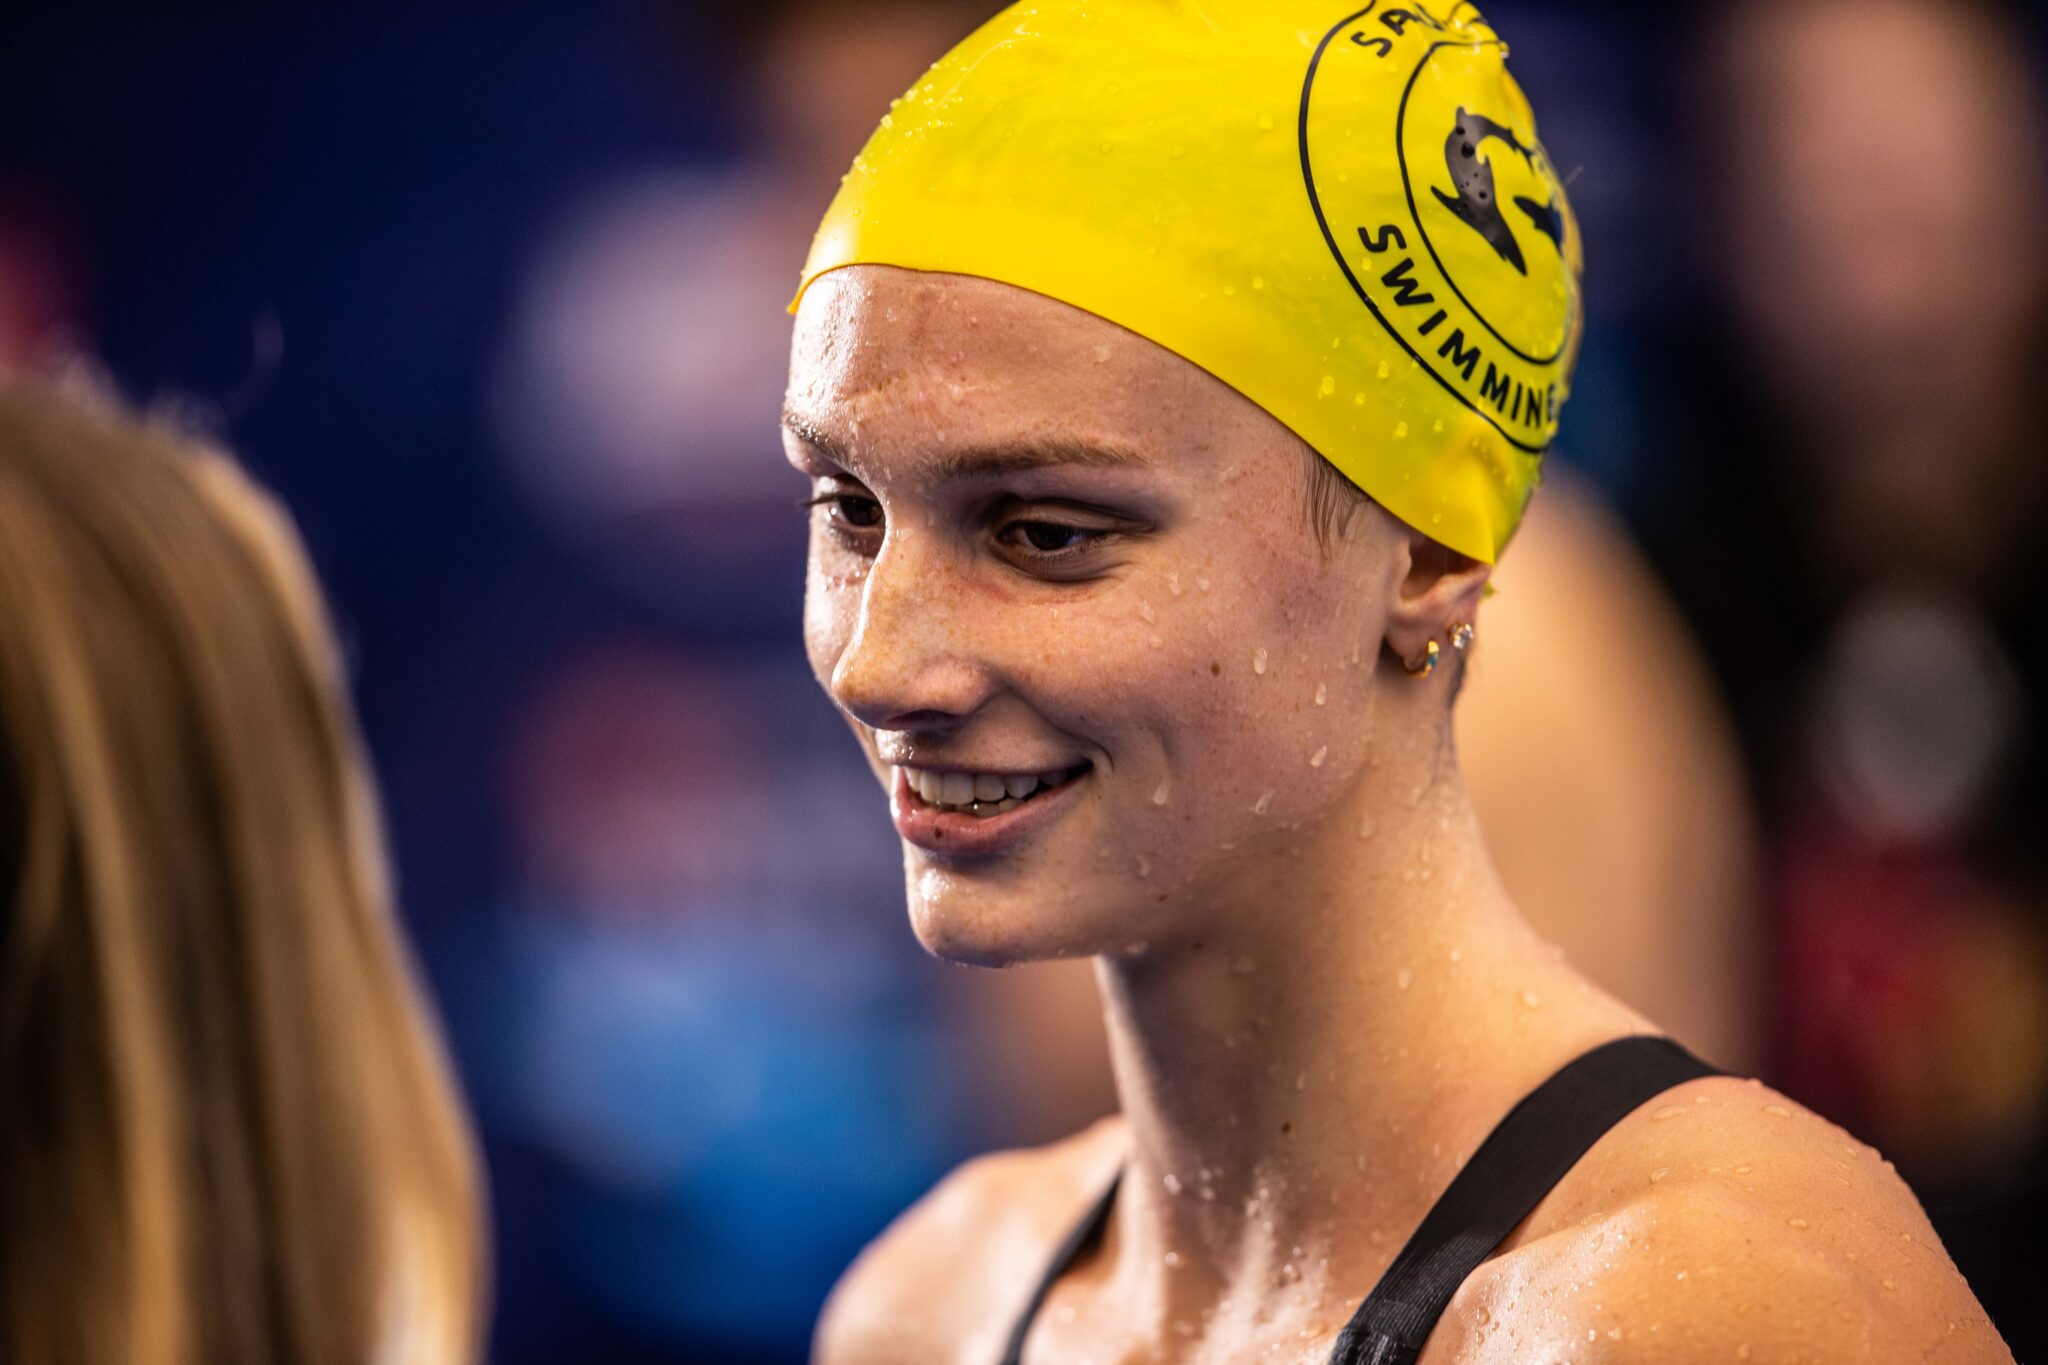 Summer McIntosh Breaks World Record in 400 IM at Canadian Trials in Race Video